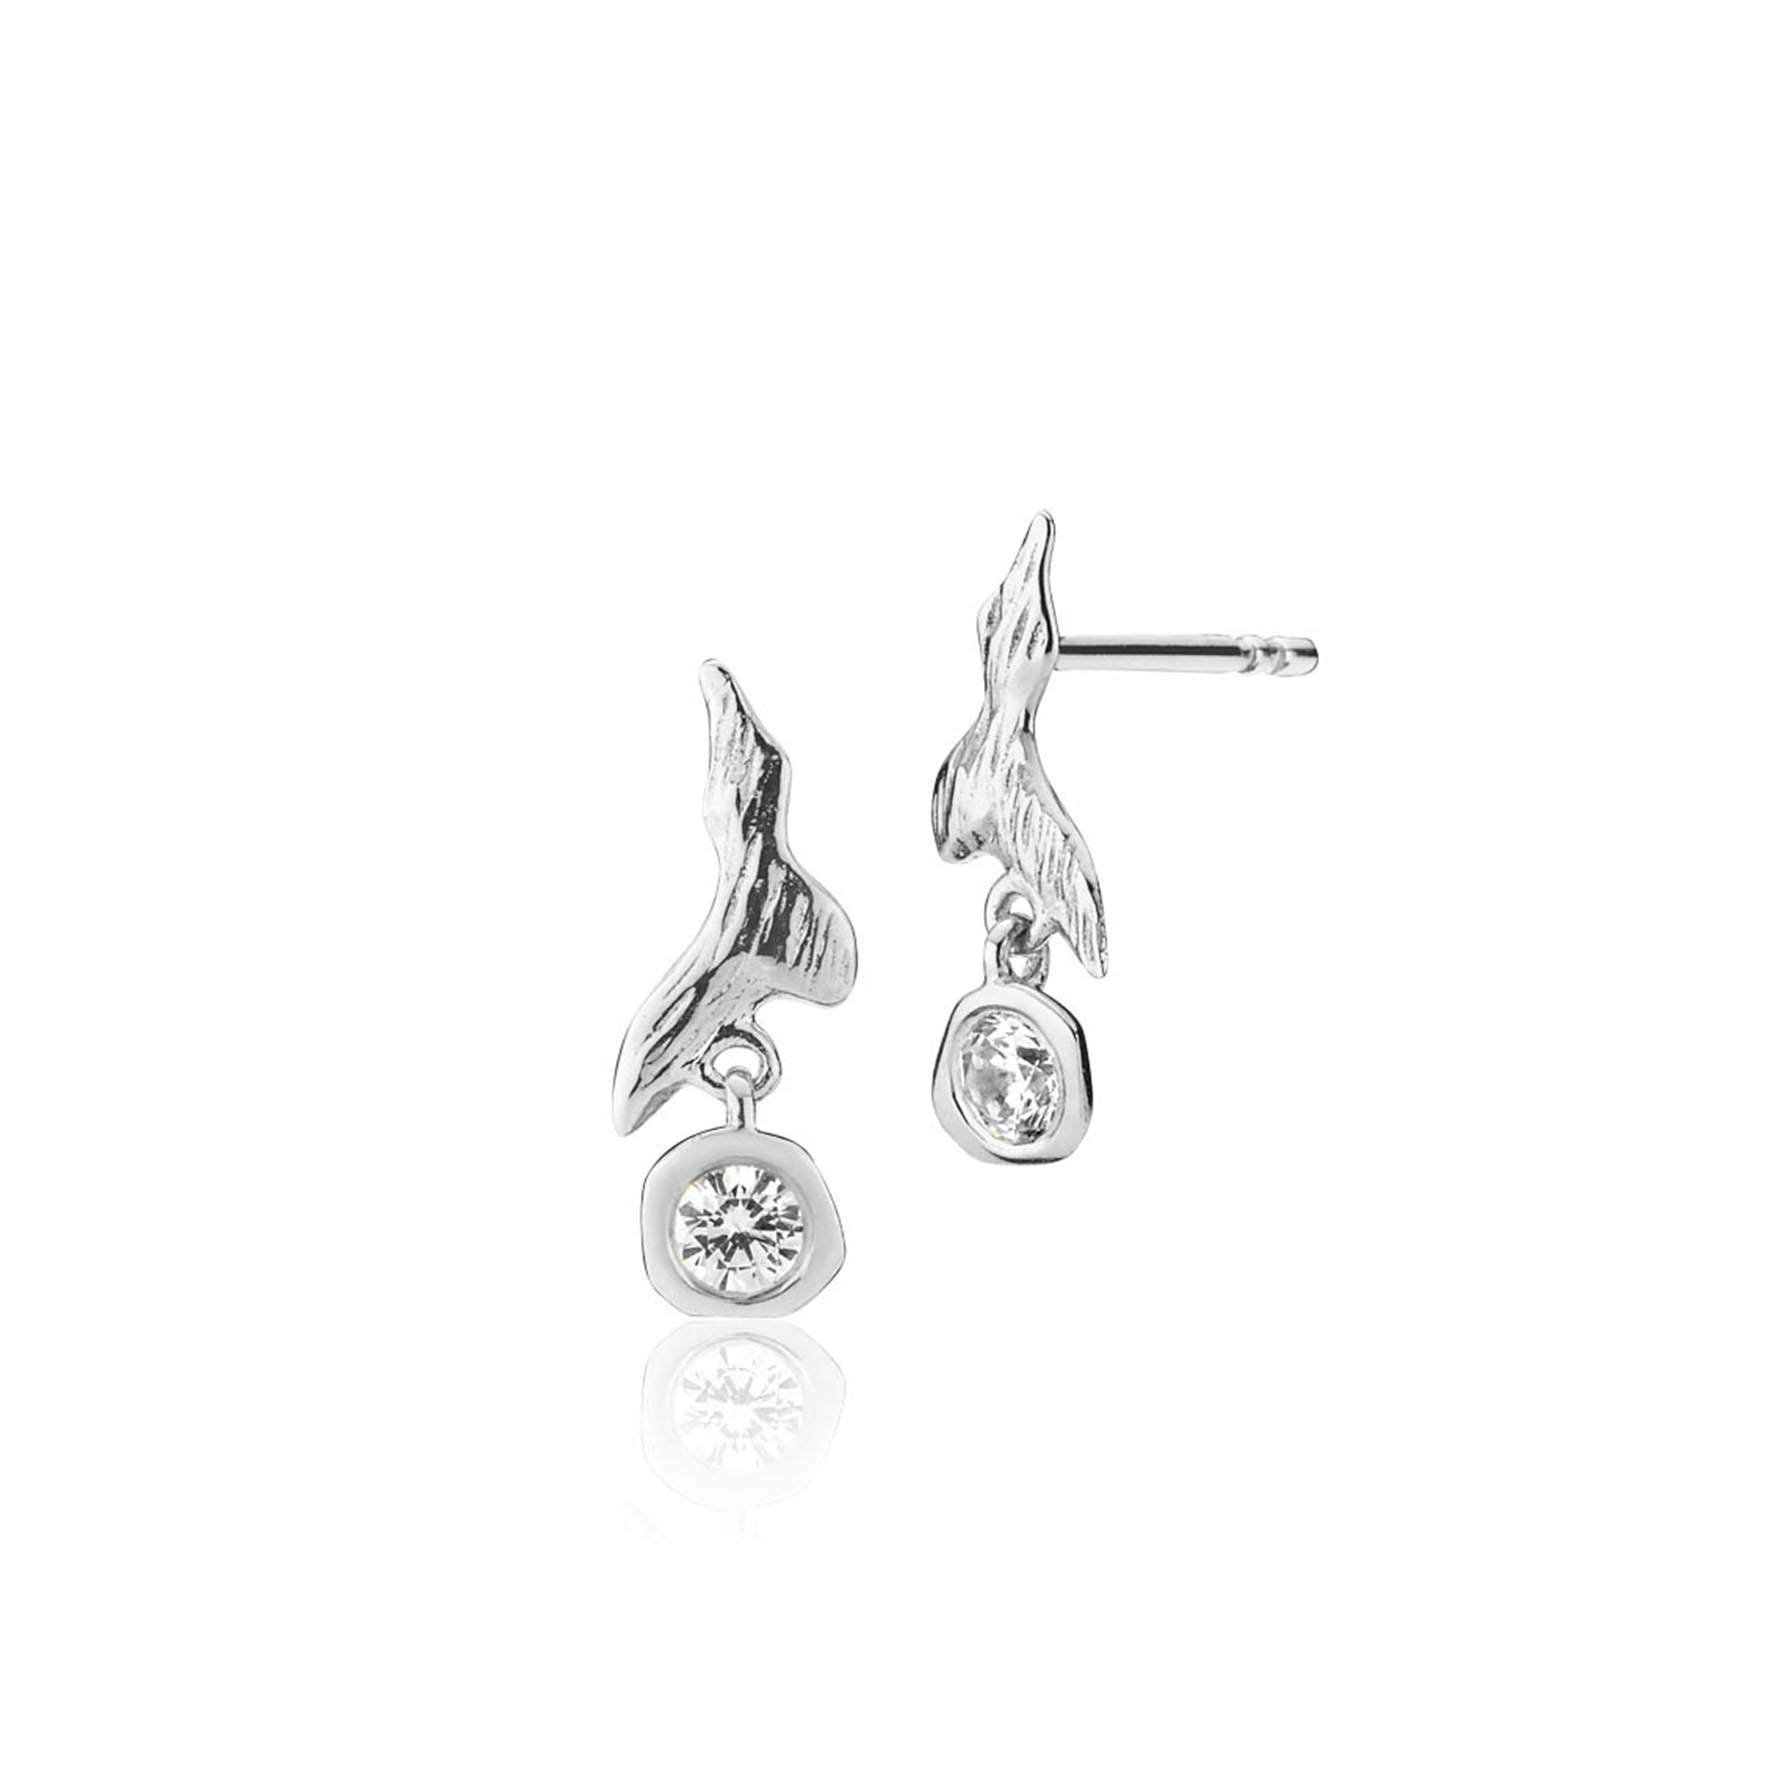 Fairy Earrings With Stone from Izabel Camille in Silver Sterling 925